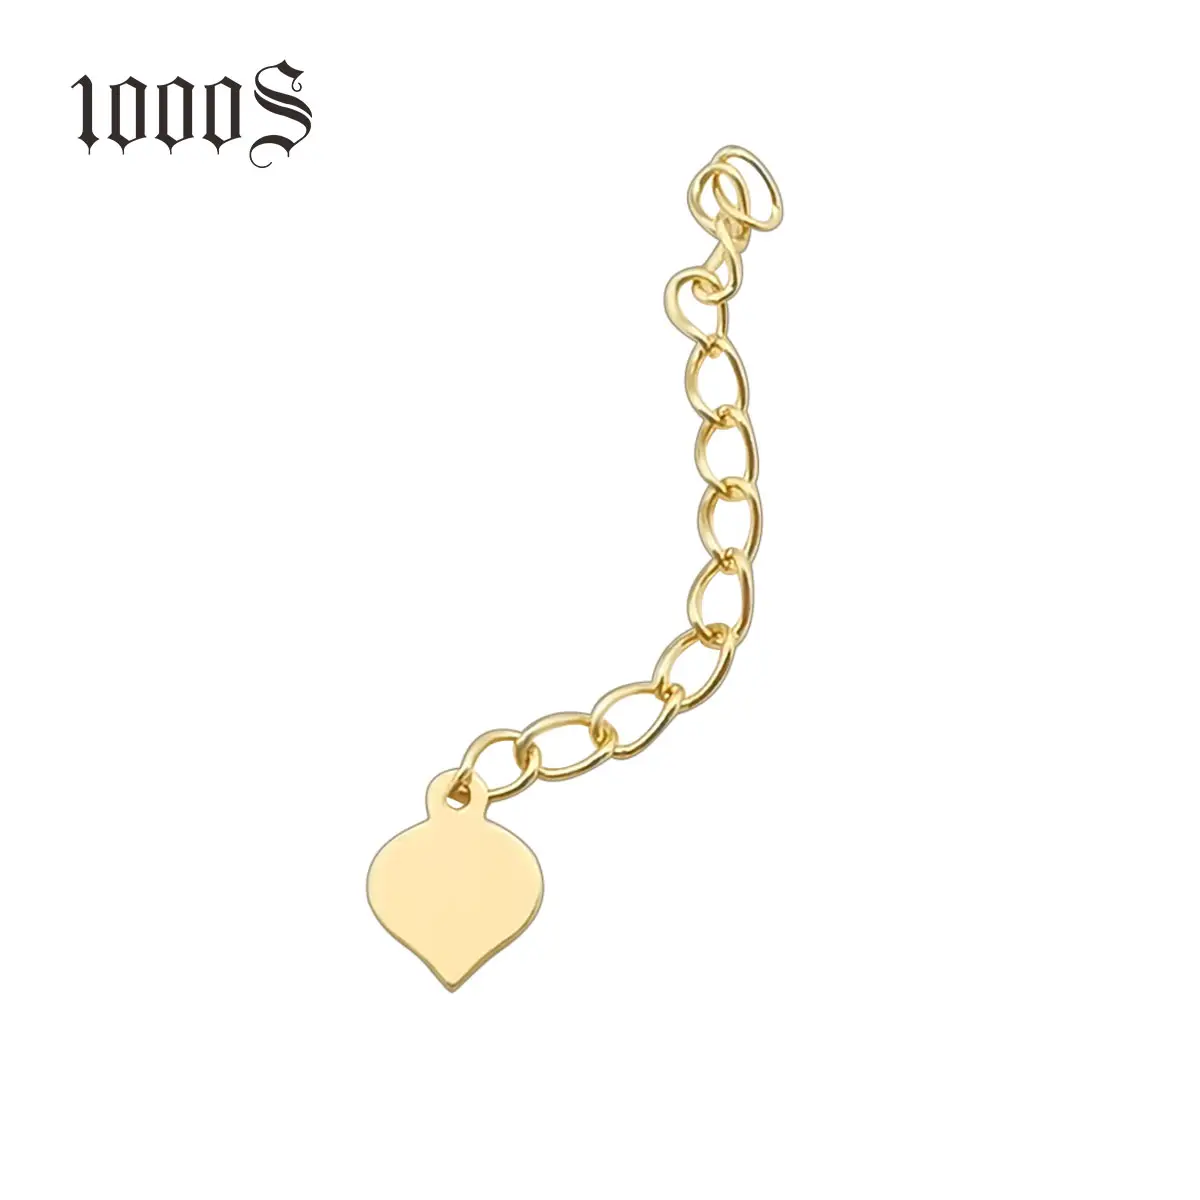 1000s 18k Gold Jewelry Real Genuine 18K Yellow Solid Gold Accessory Heart Extender Chain For Necklaces Bracelets